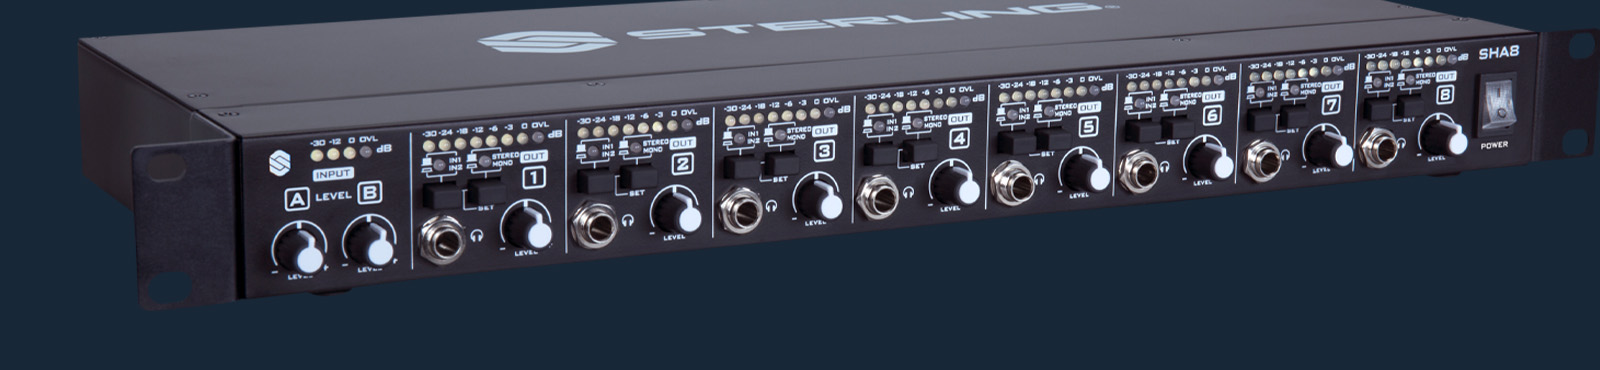 Sterling SHA8 8-channel rackmount headphone amplifier right close up.